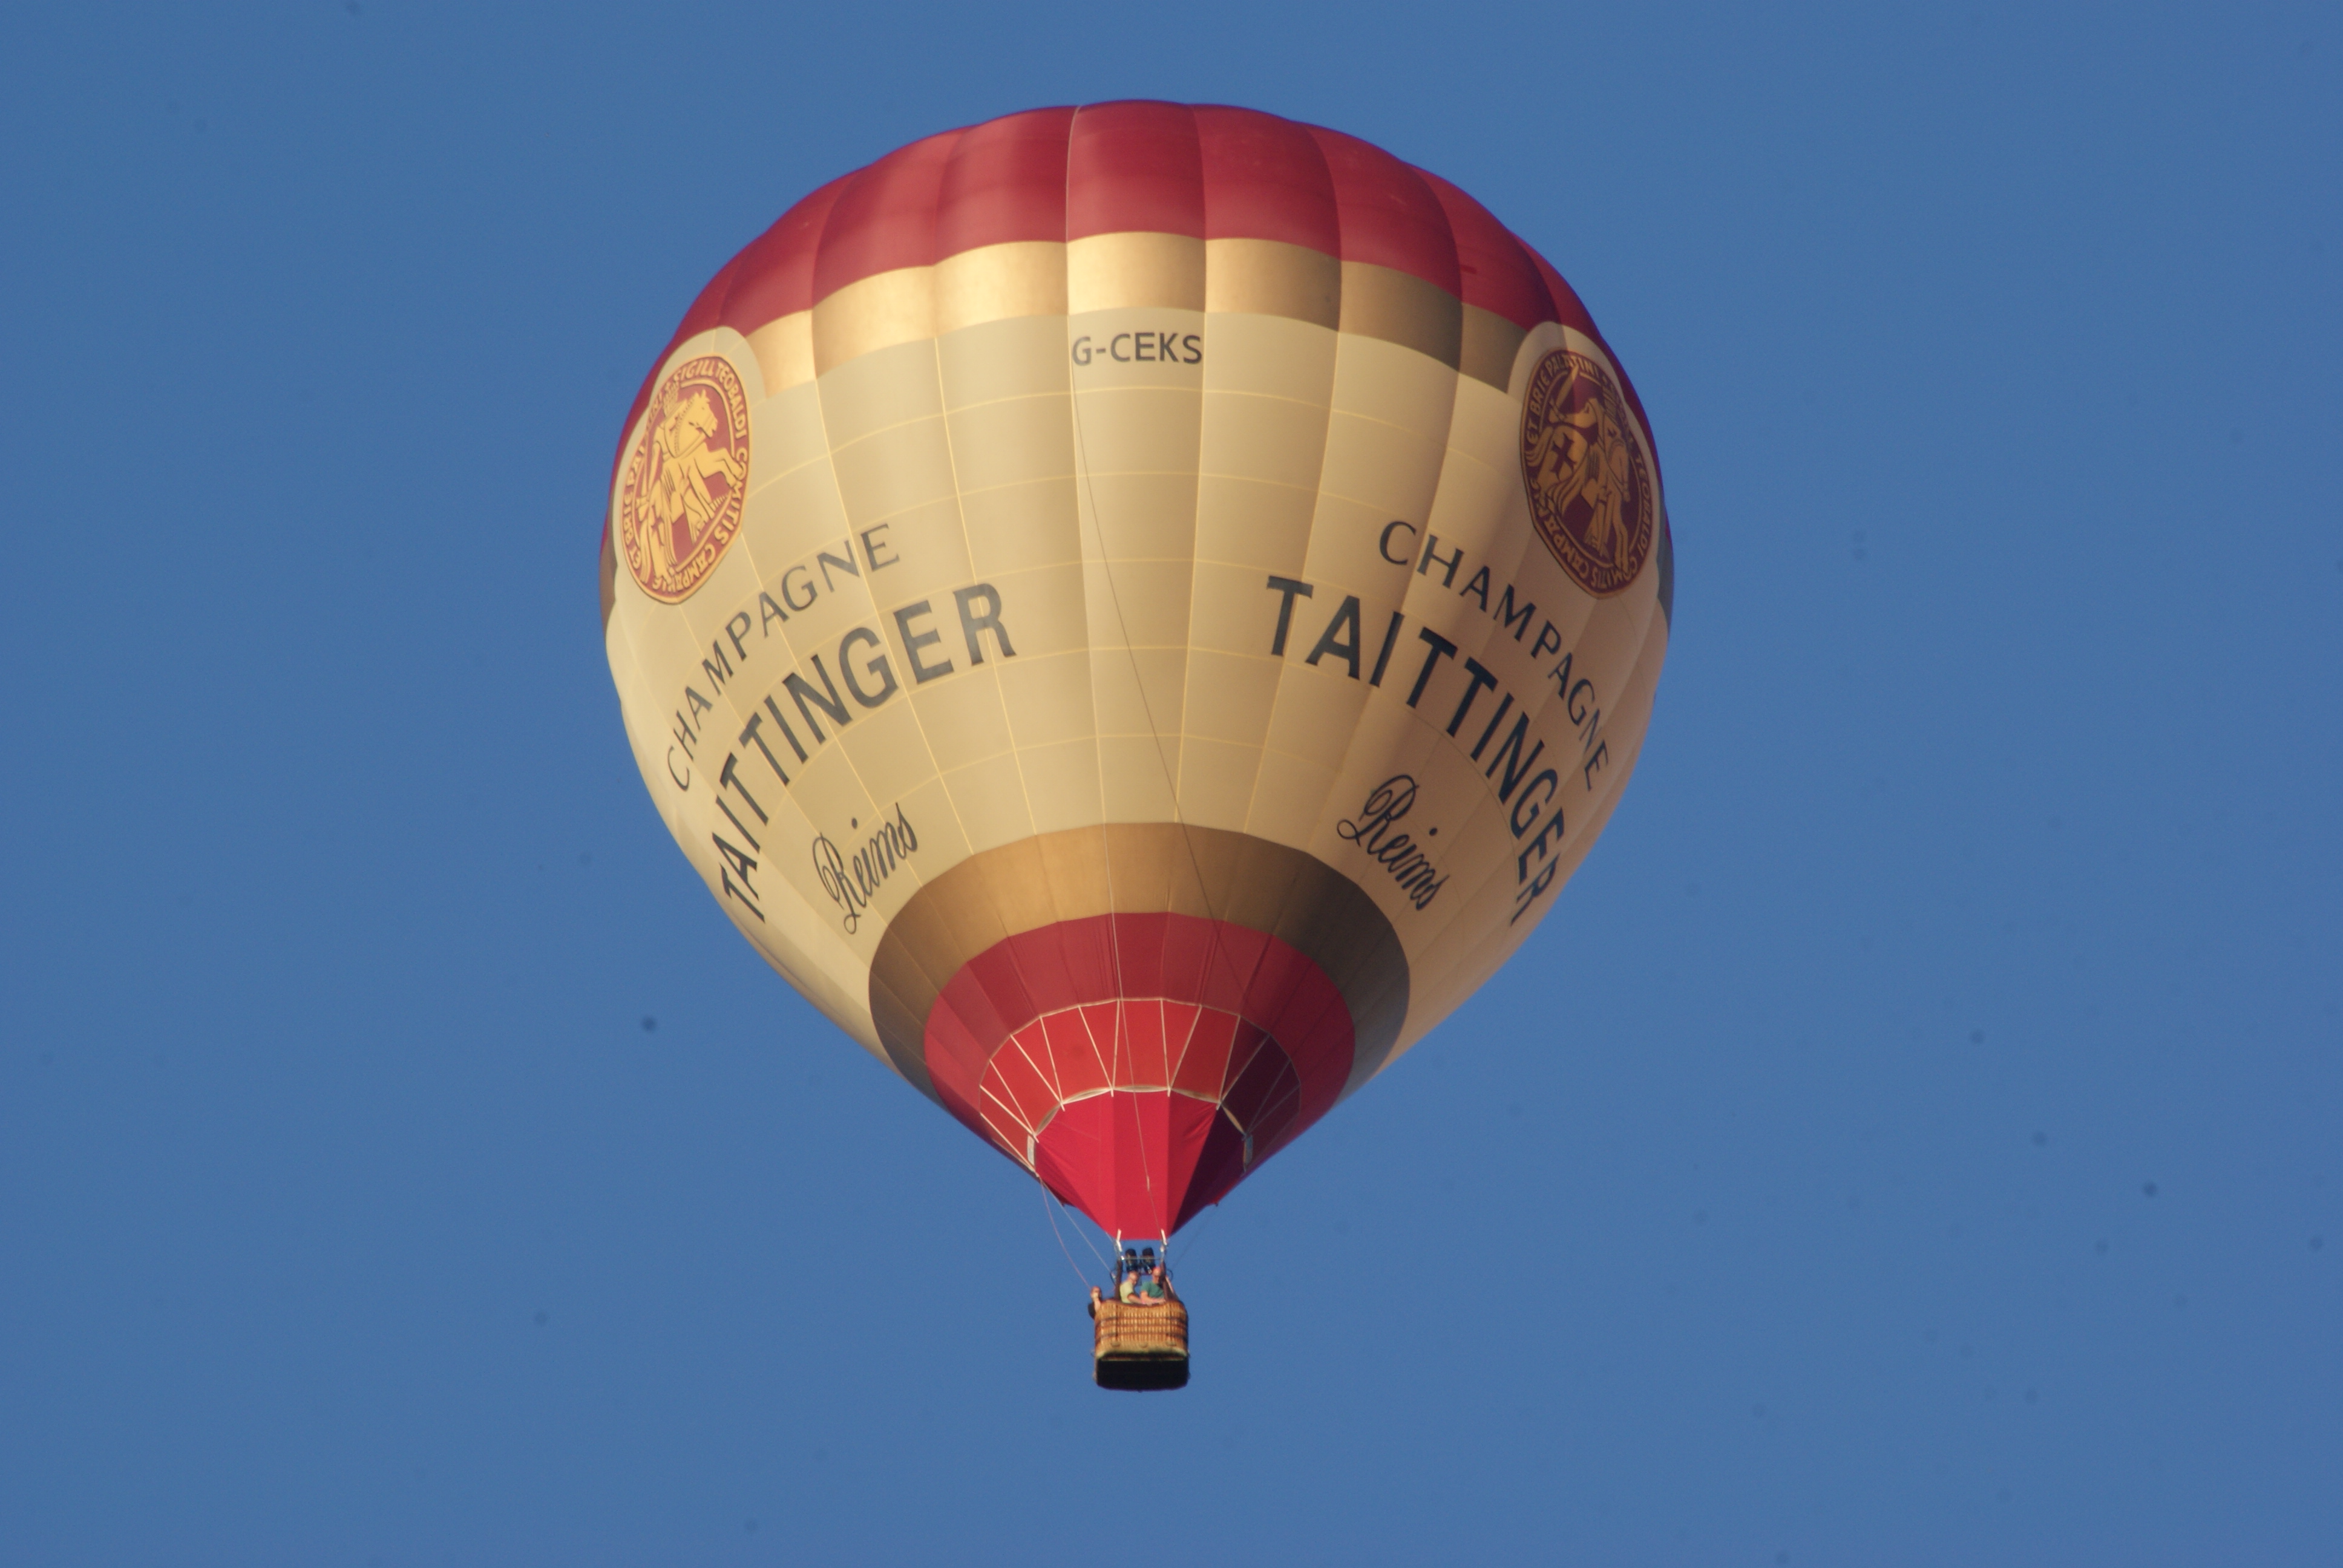 A picture from the Bristol International Balloon Fiesta